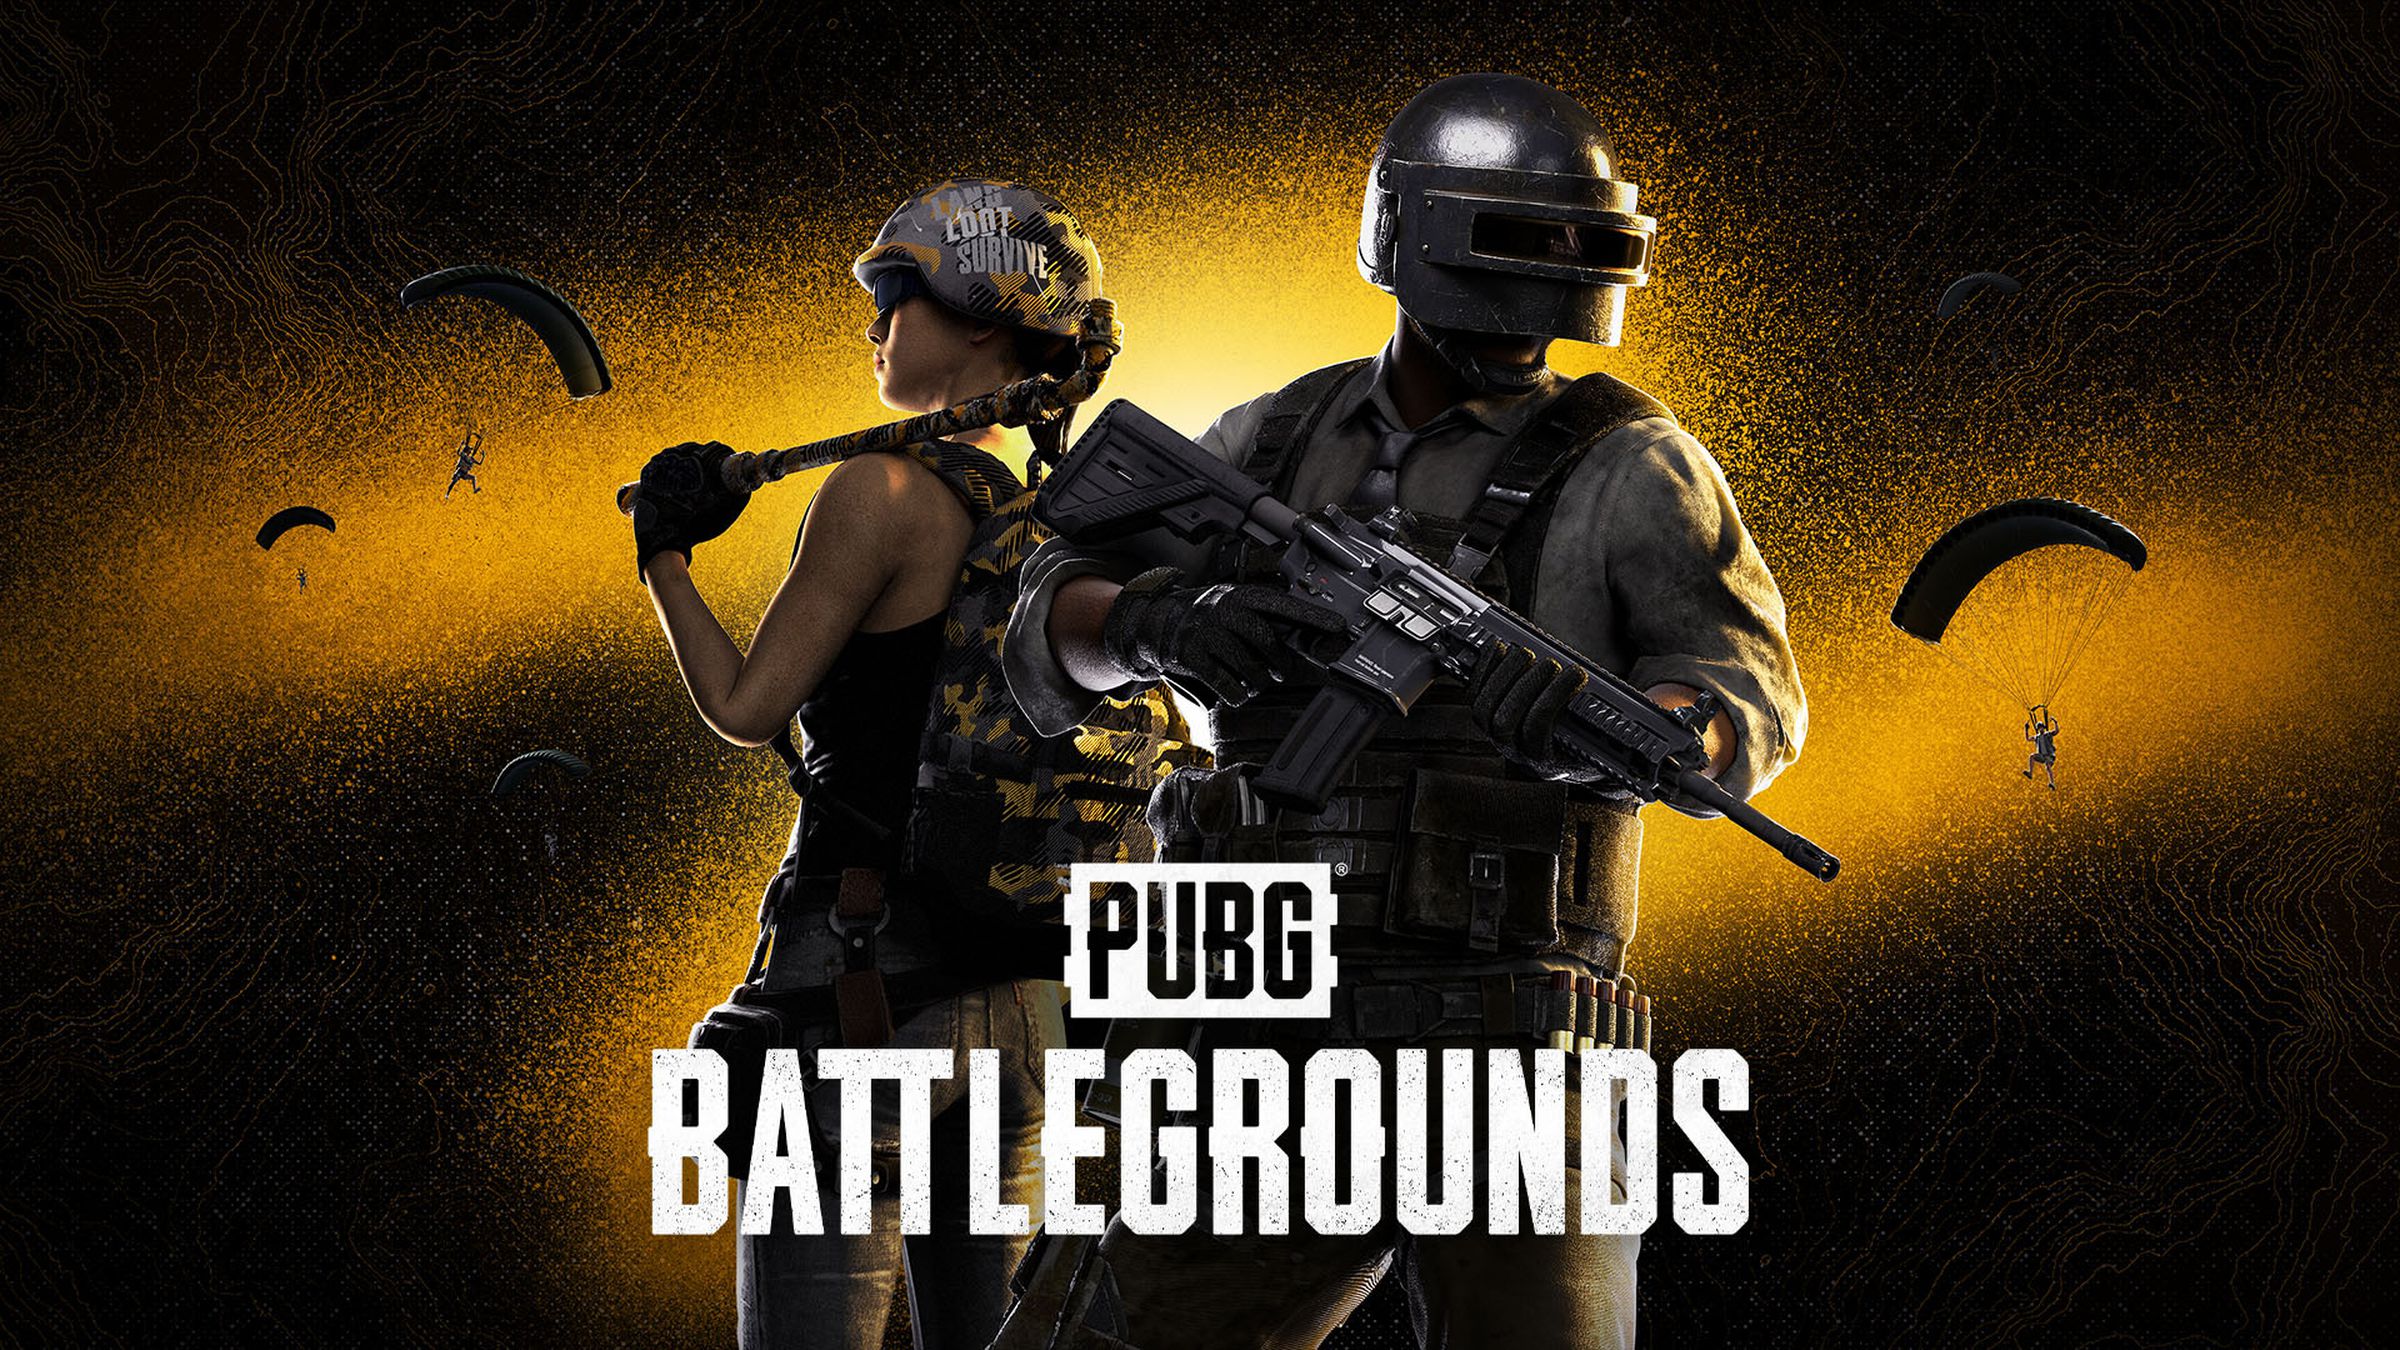 PUBG: Battlegrounds is coming to Epic Games Store